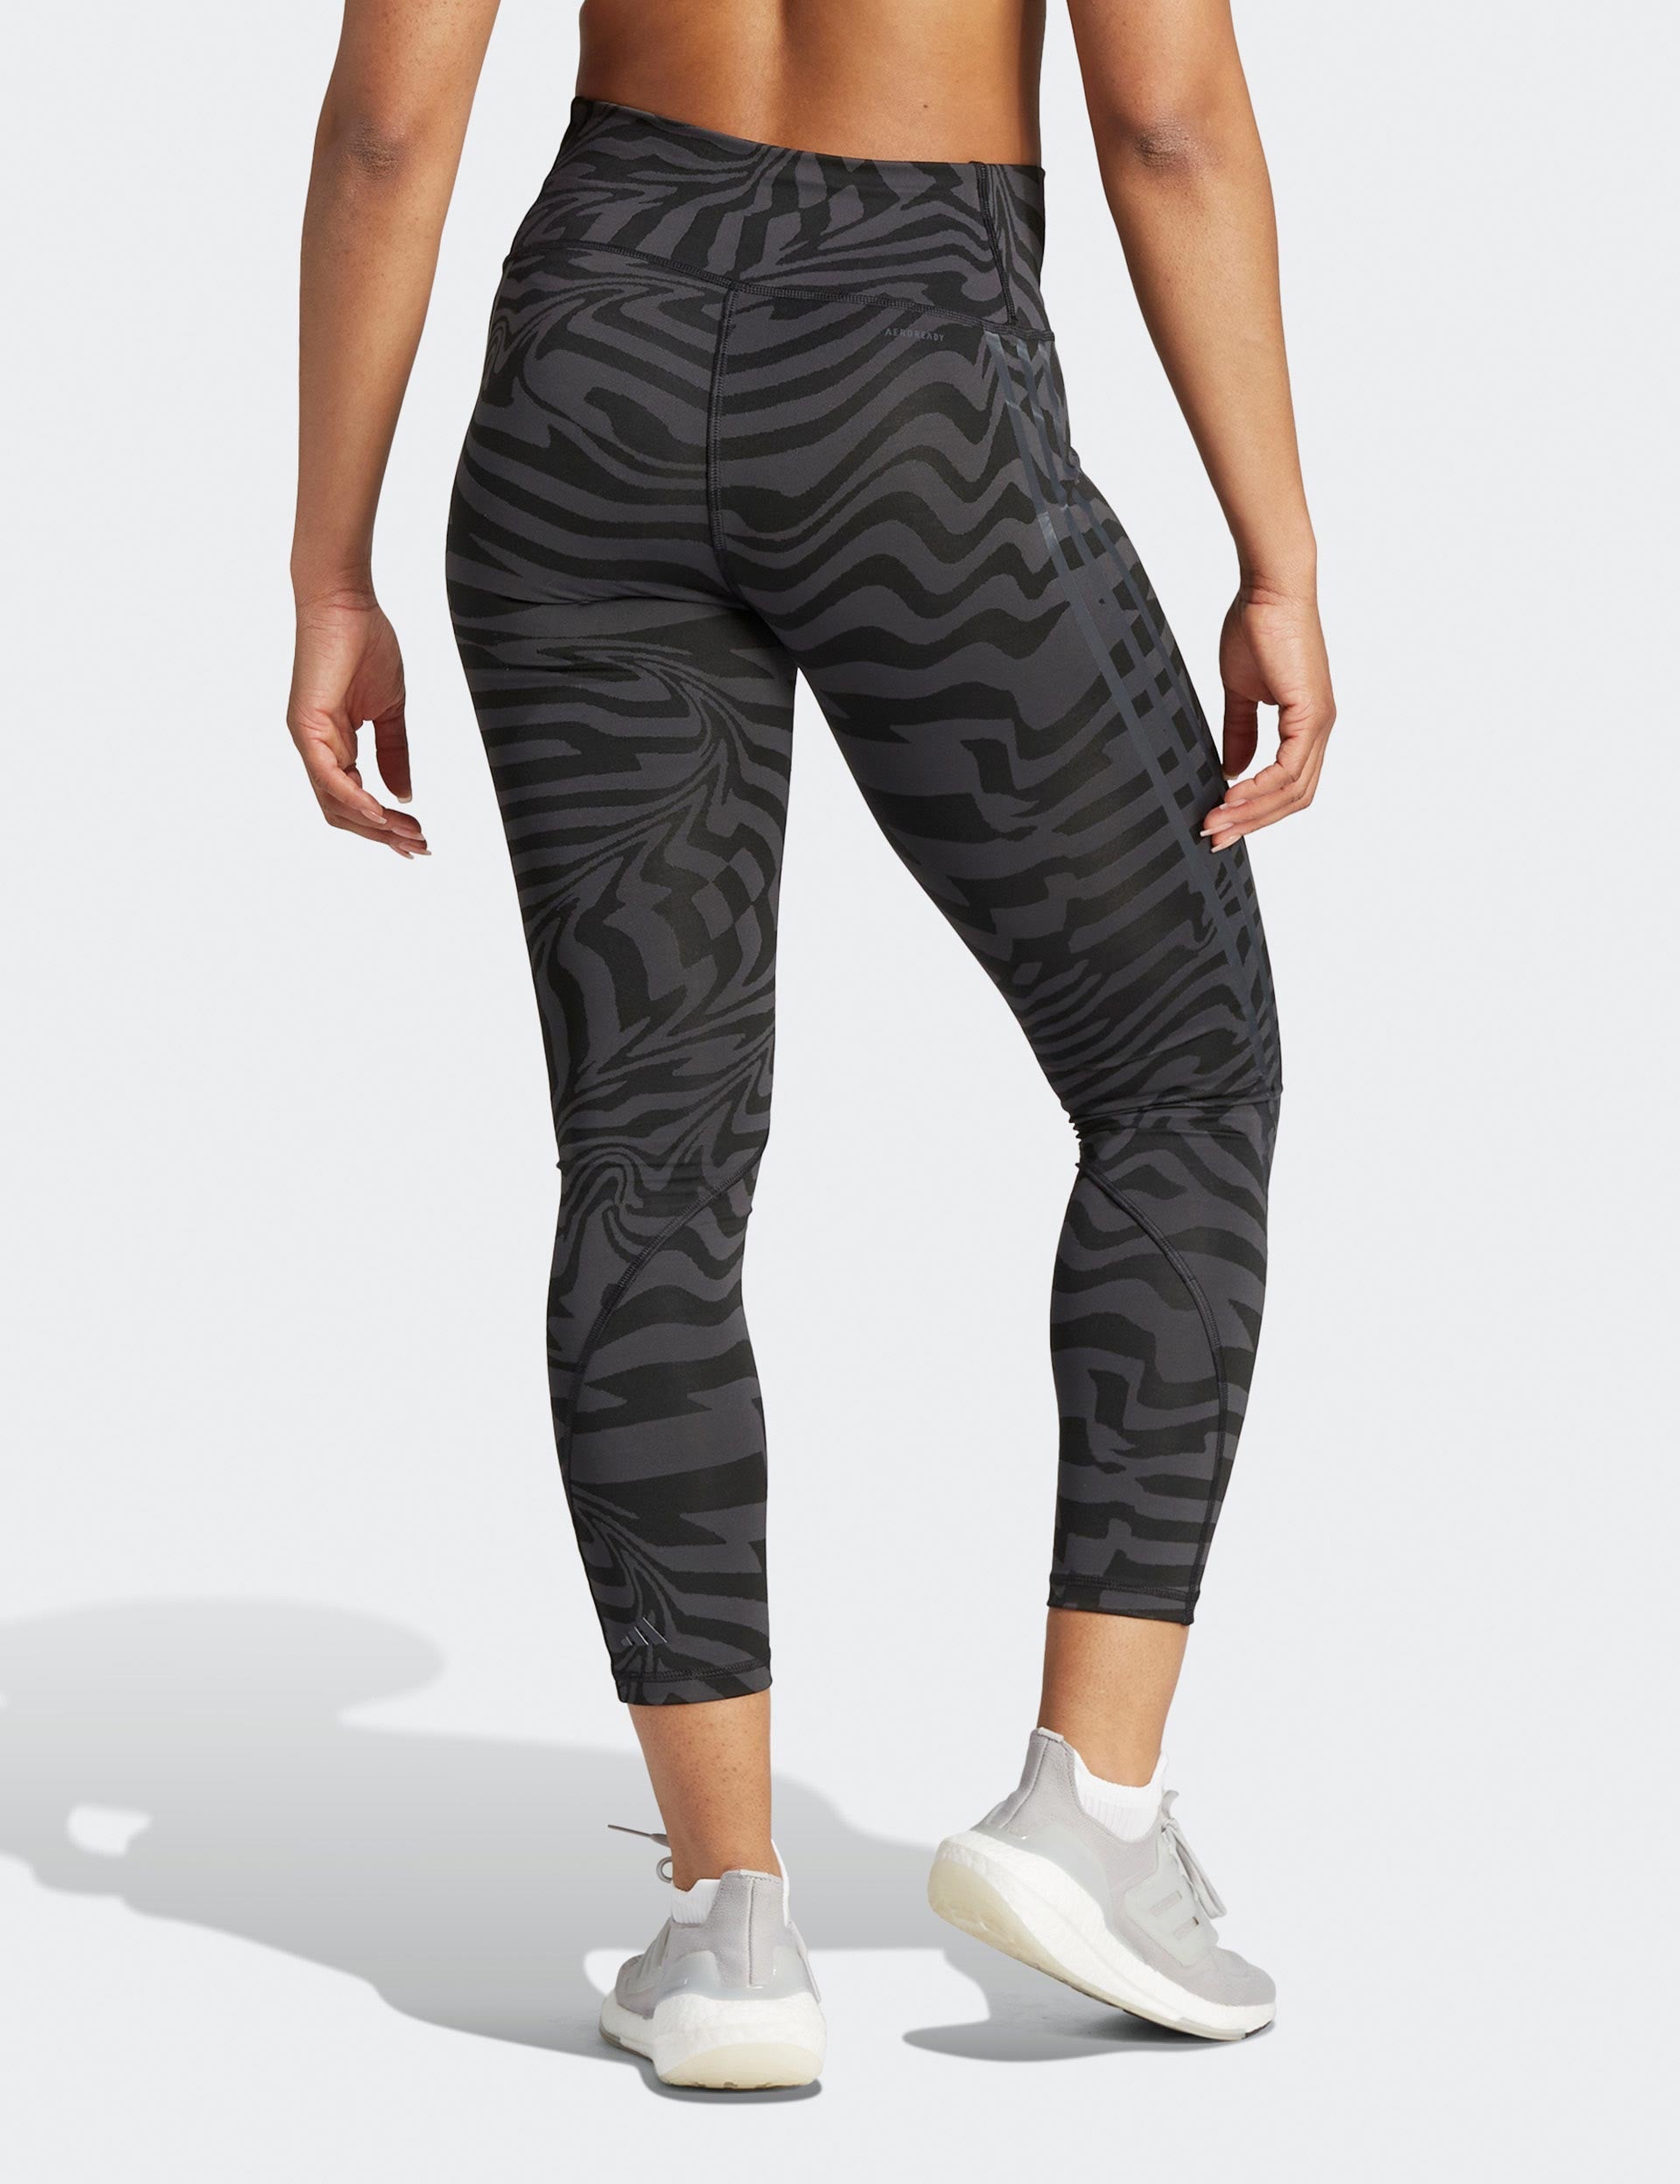 Adidas 3-Stripe Tights  Outfits with leggings, Striped leggings outfit,  Adidas leggings outfit